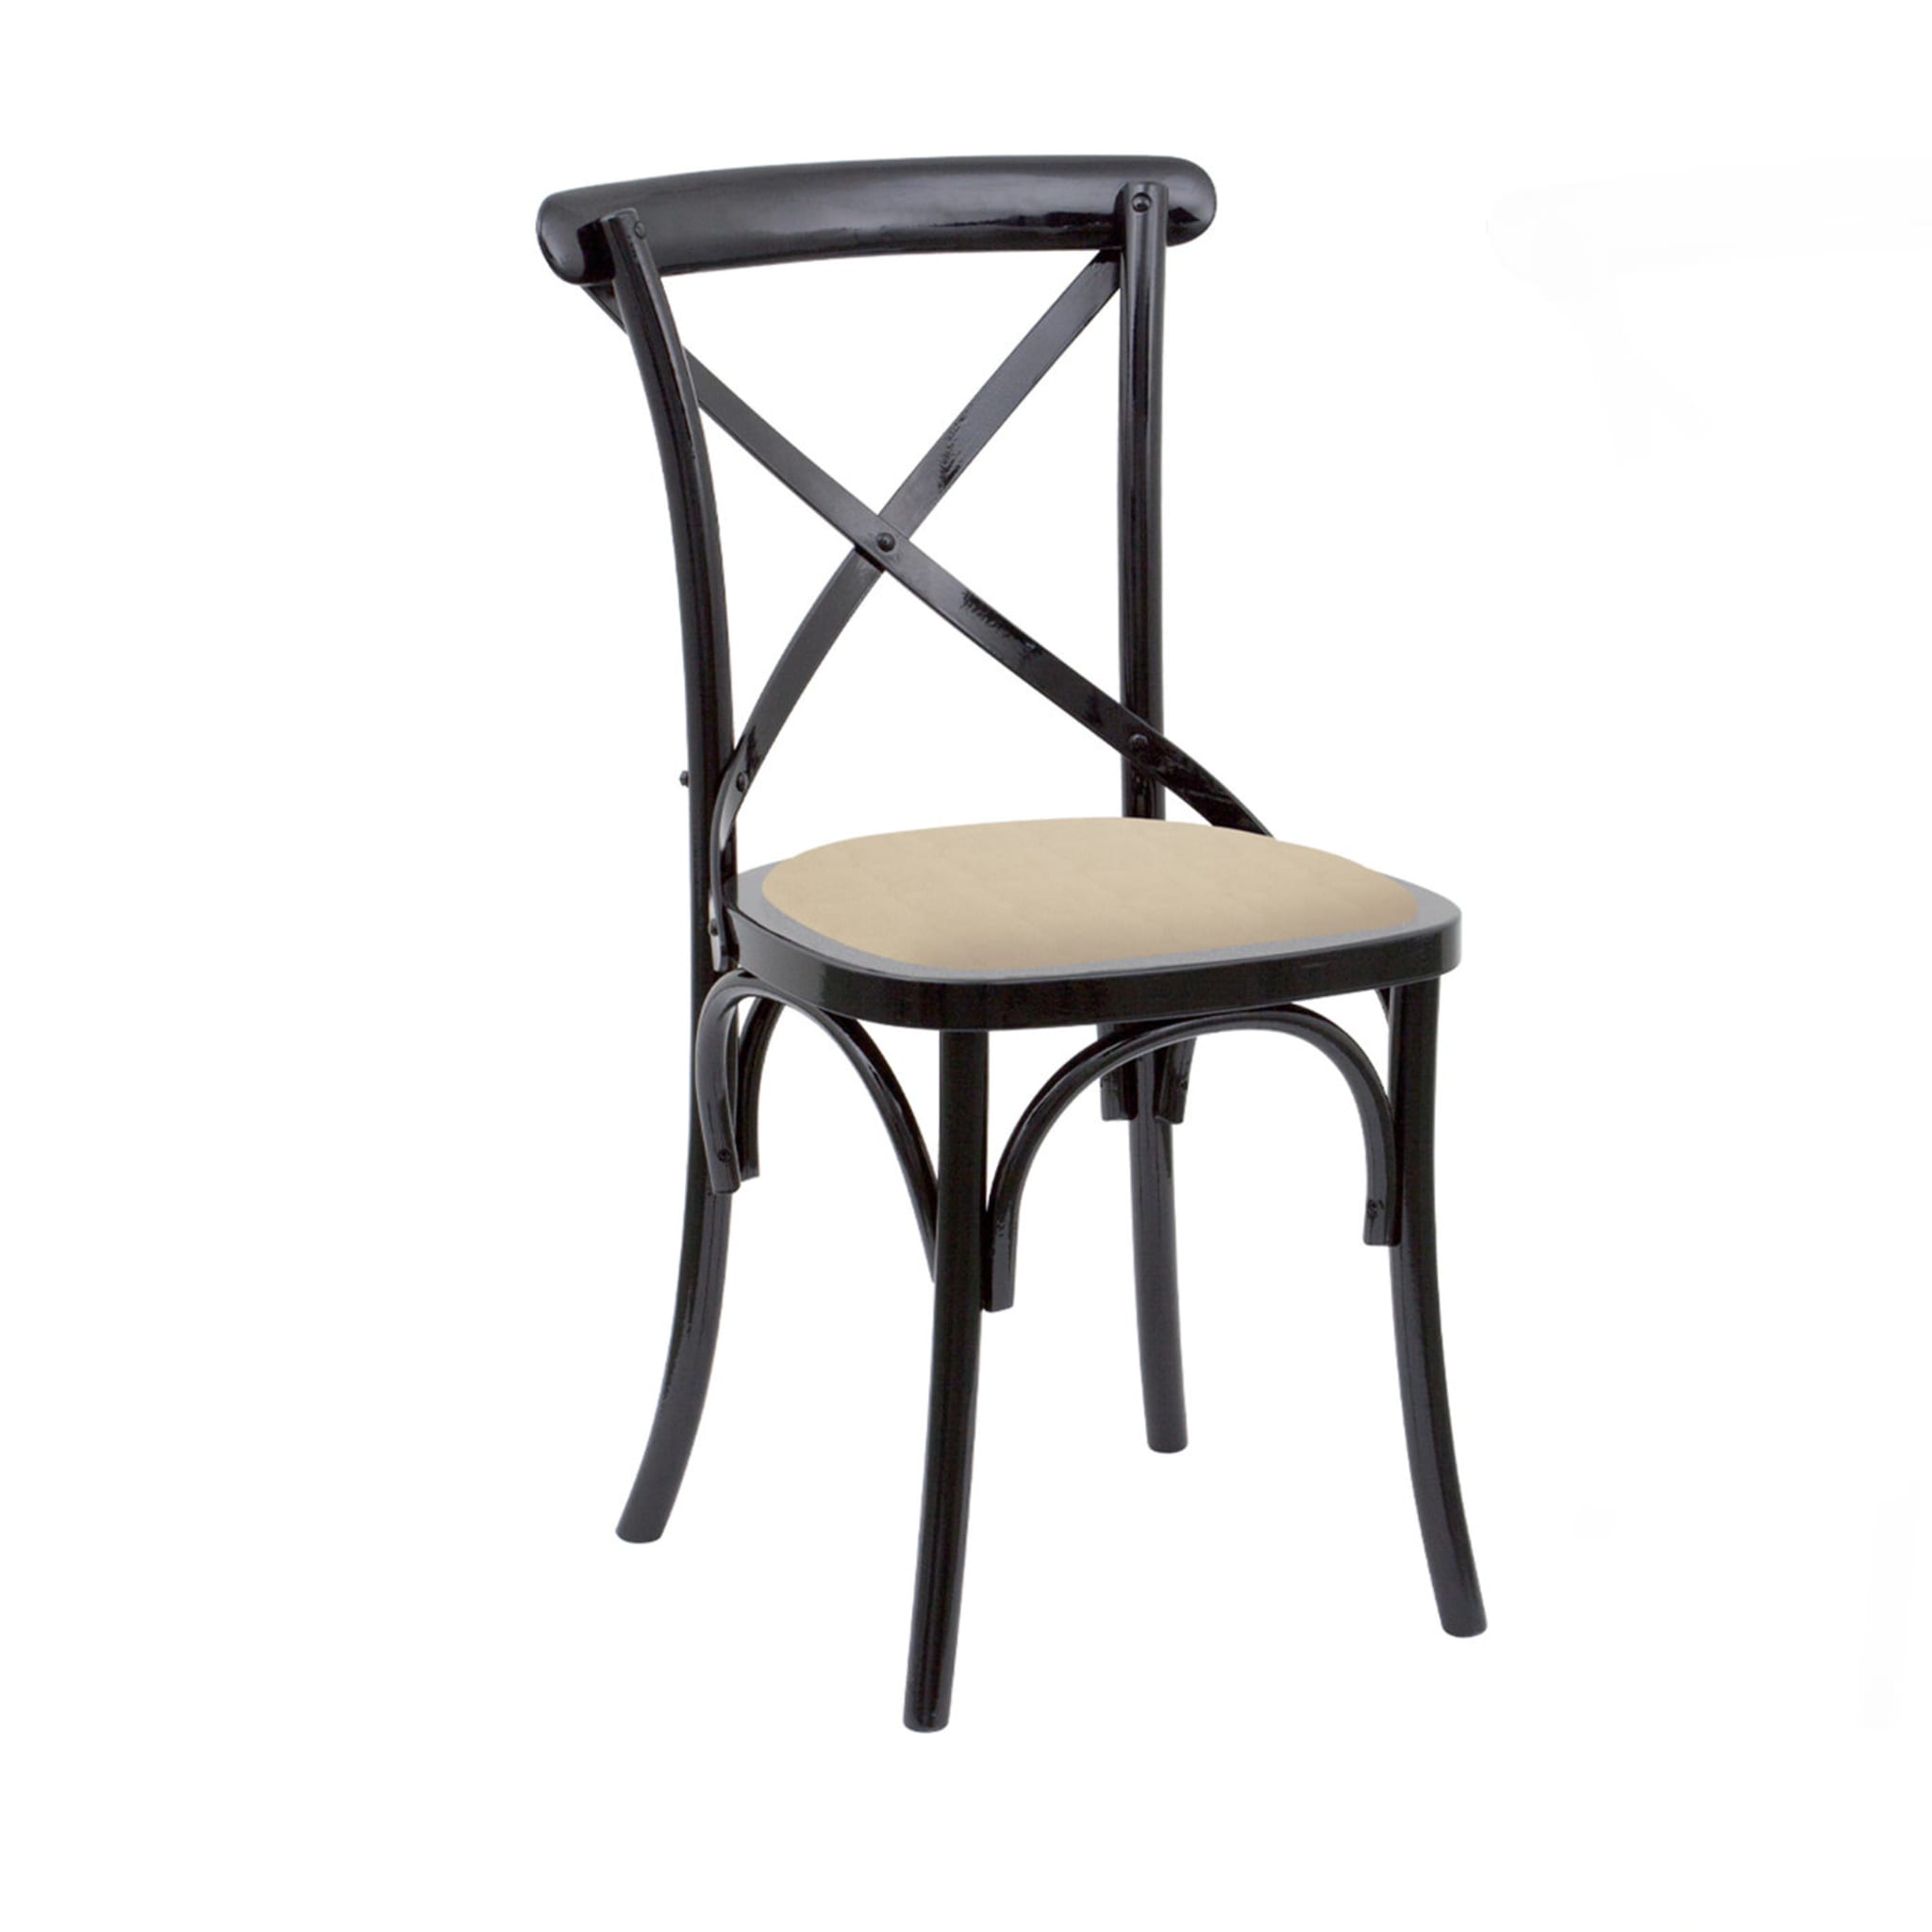 Ciao Swar Set of 2 Black Chairs - Main view